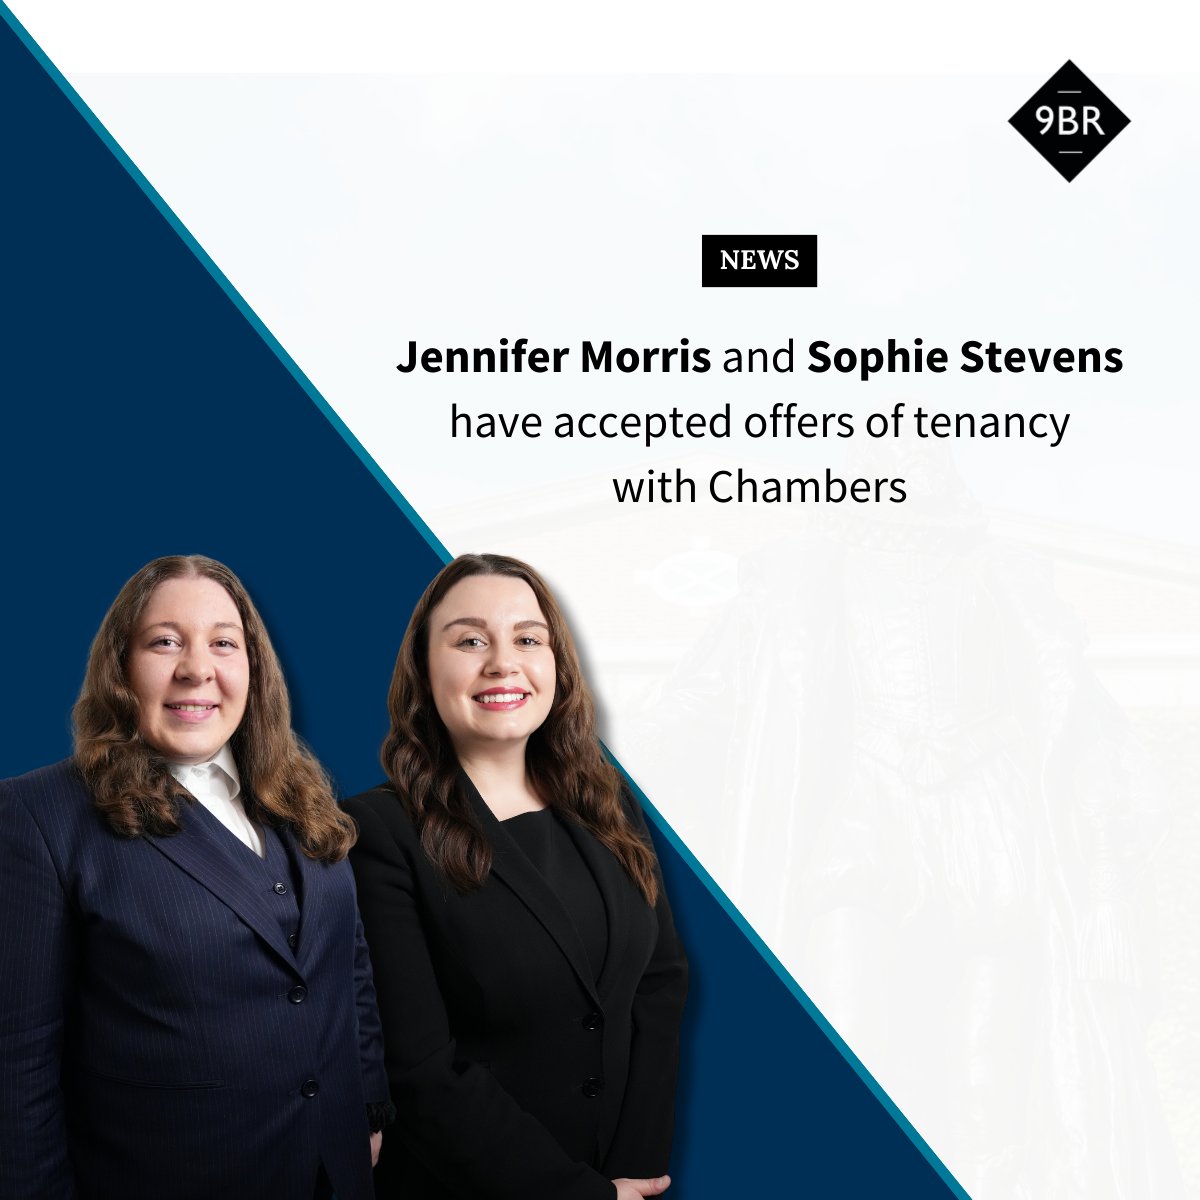 We are pleased to announce that Jennifer Morris (@JenLouiseMorris) and Sophie Stevens (@sophie_mae97) have accepted offers of tenancy with Chambers following the successful completion of their pupillages.